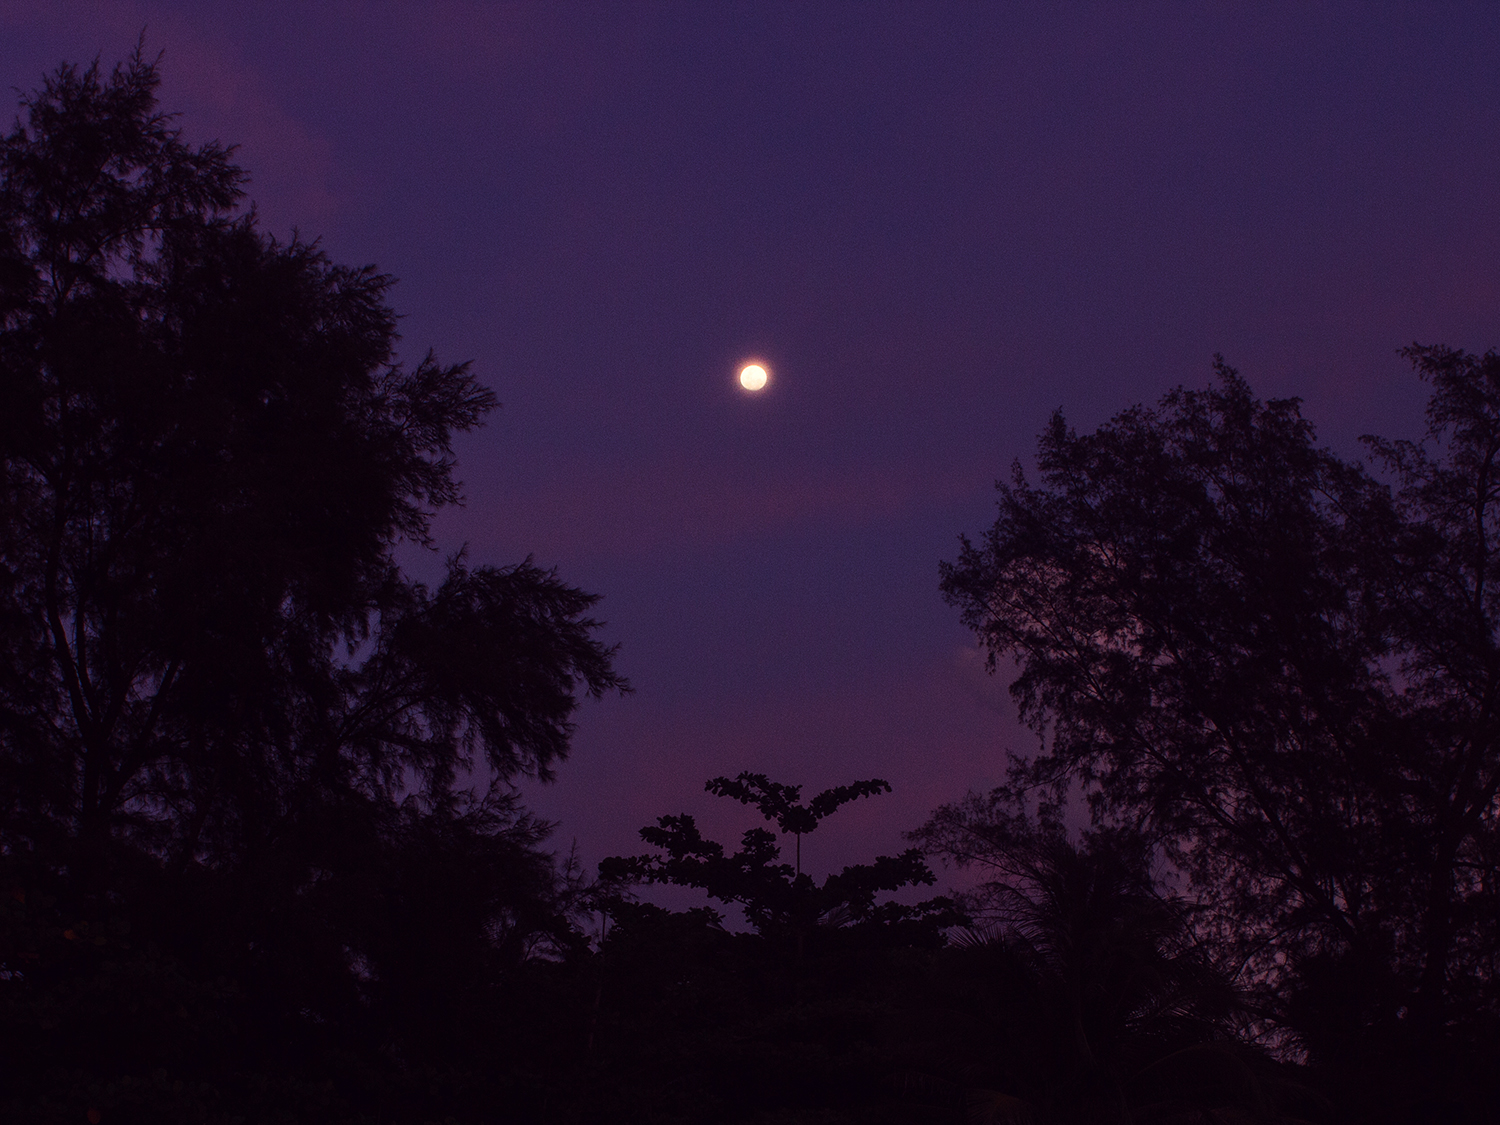 Moon rising in a purple sky over trees in Thailand.